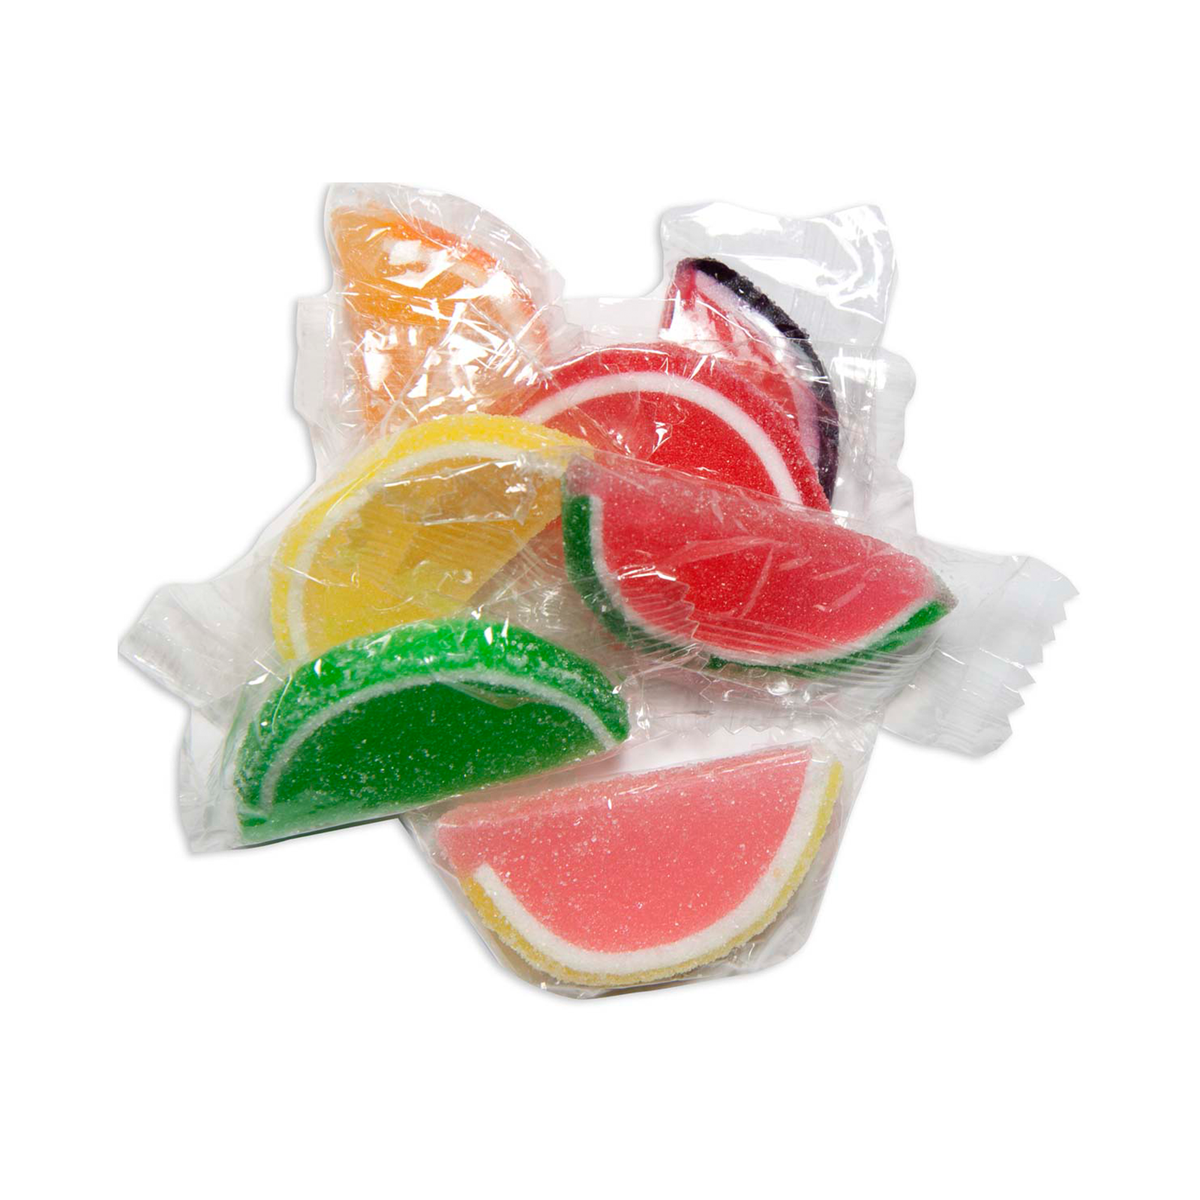 Blue Raspberry Fruit Slices - Jelly Candy 